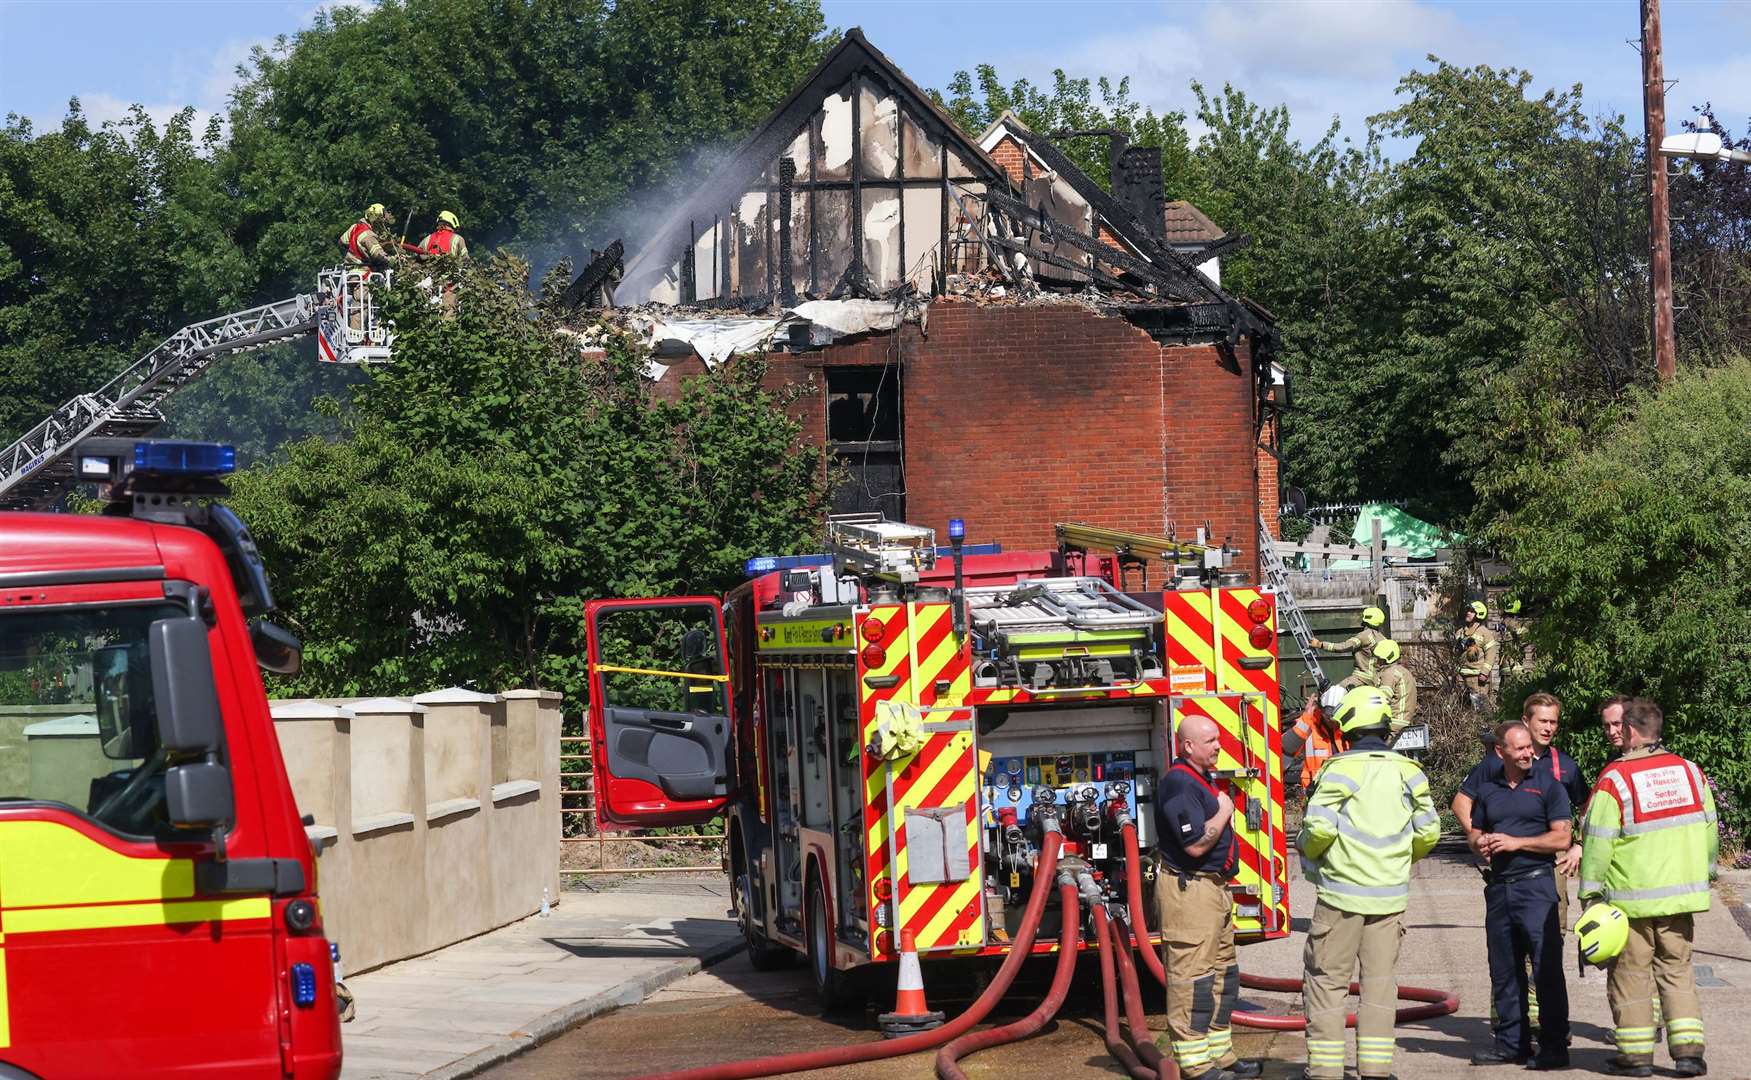 The aftermath of the blaze in Jubilee Crescent. Images: UKNIP